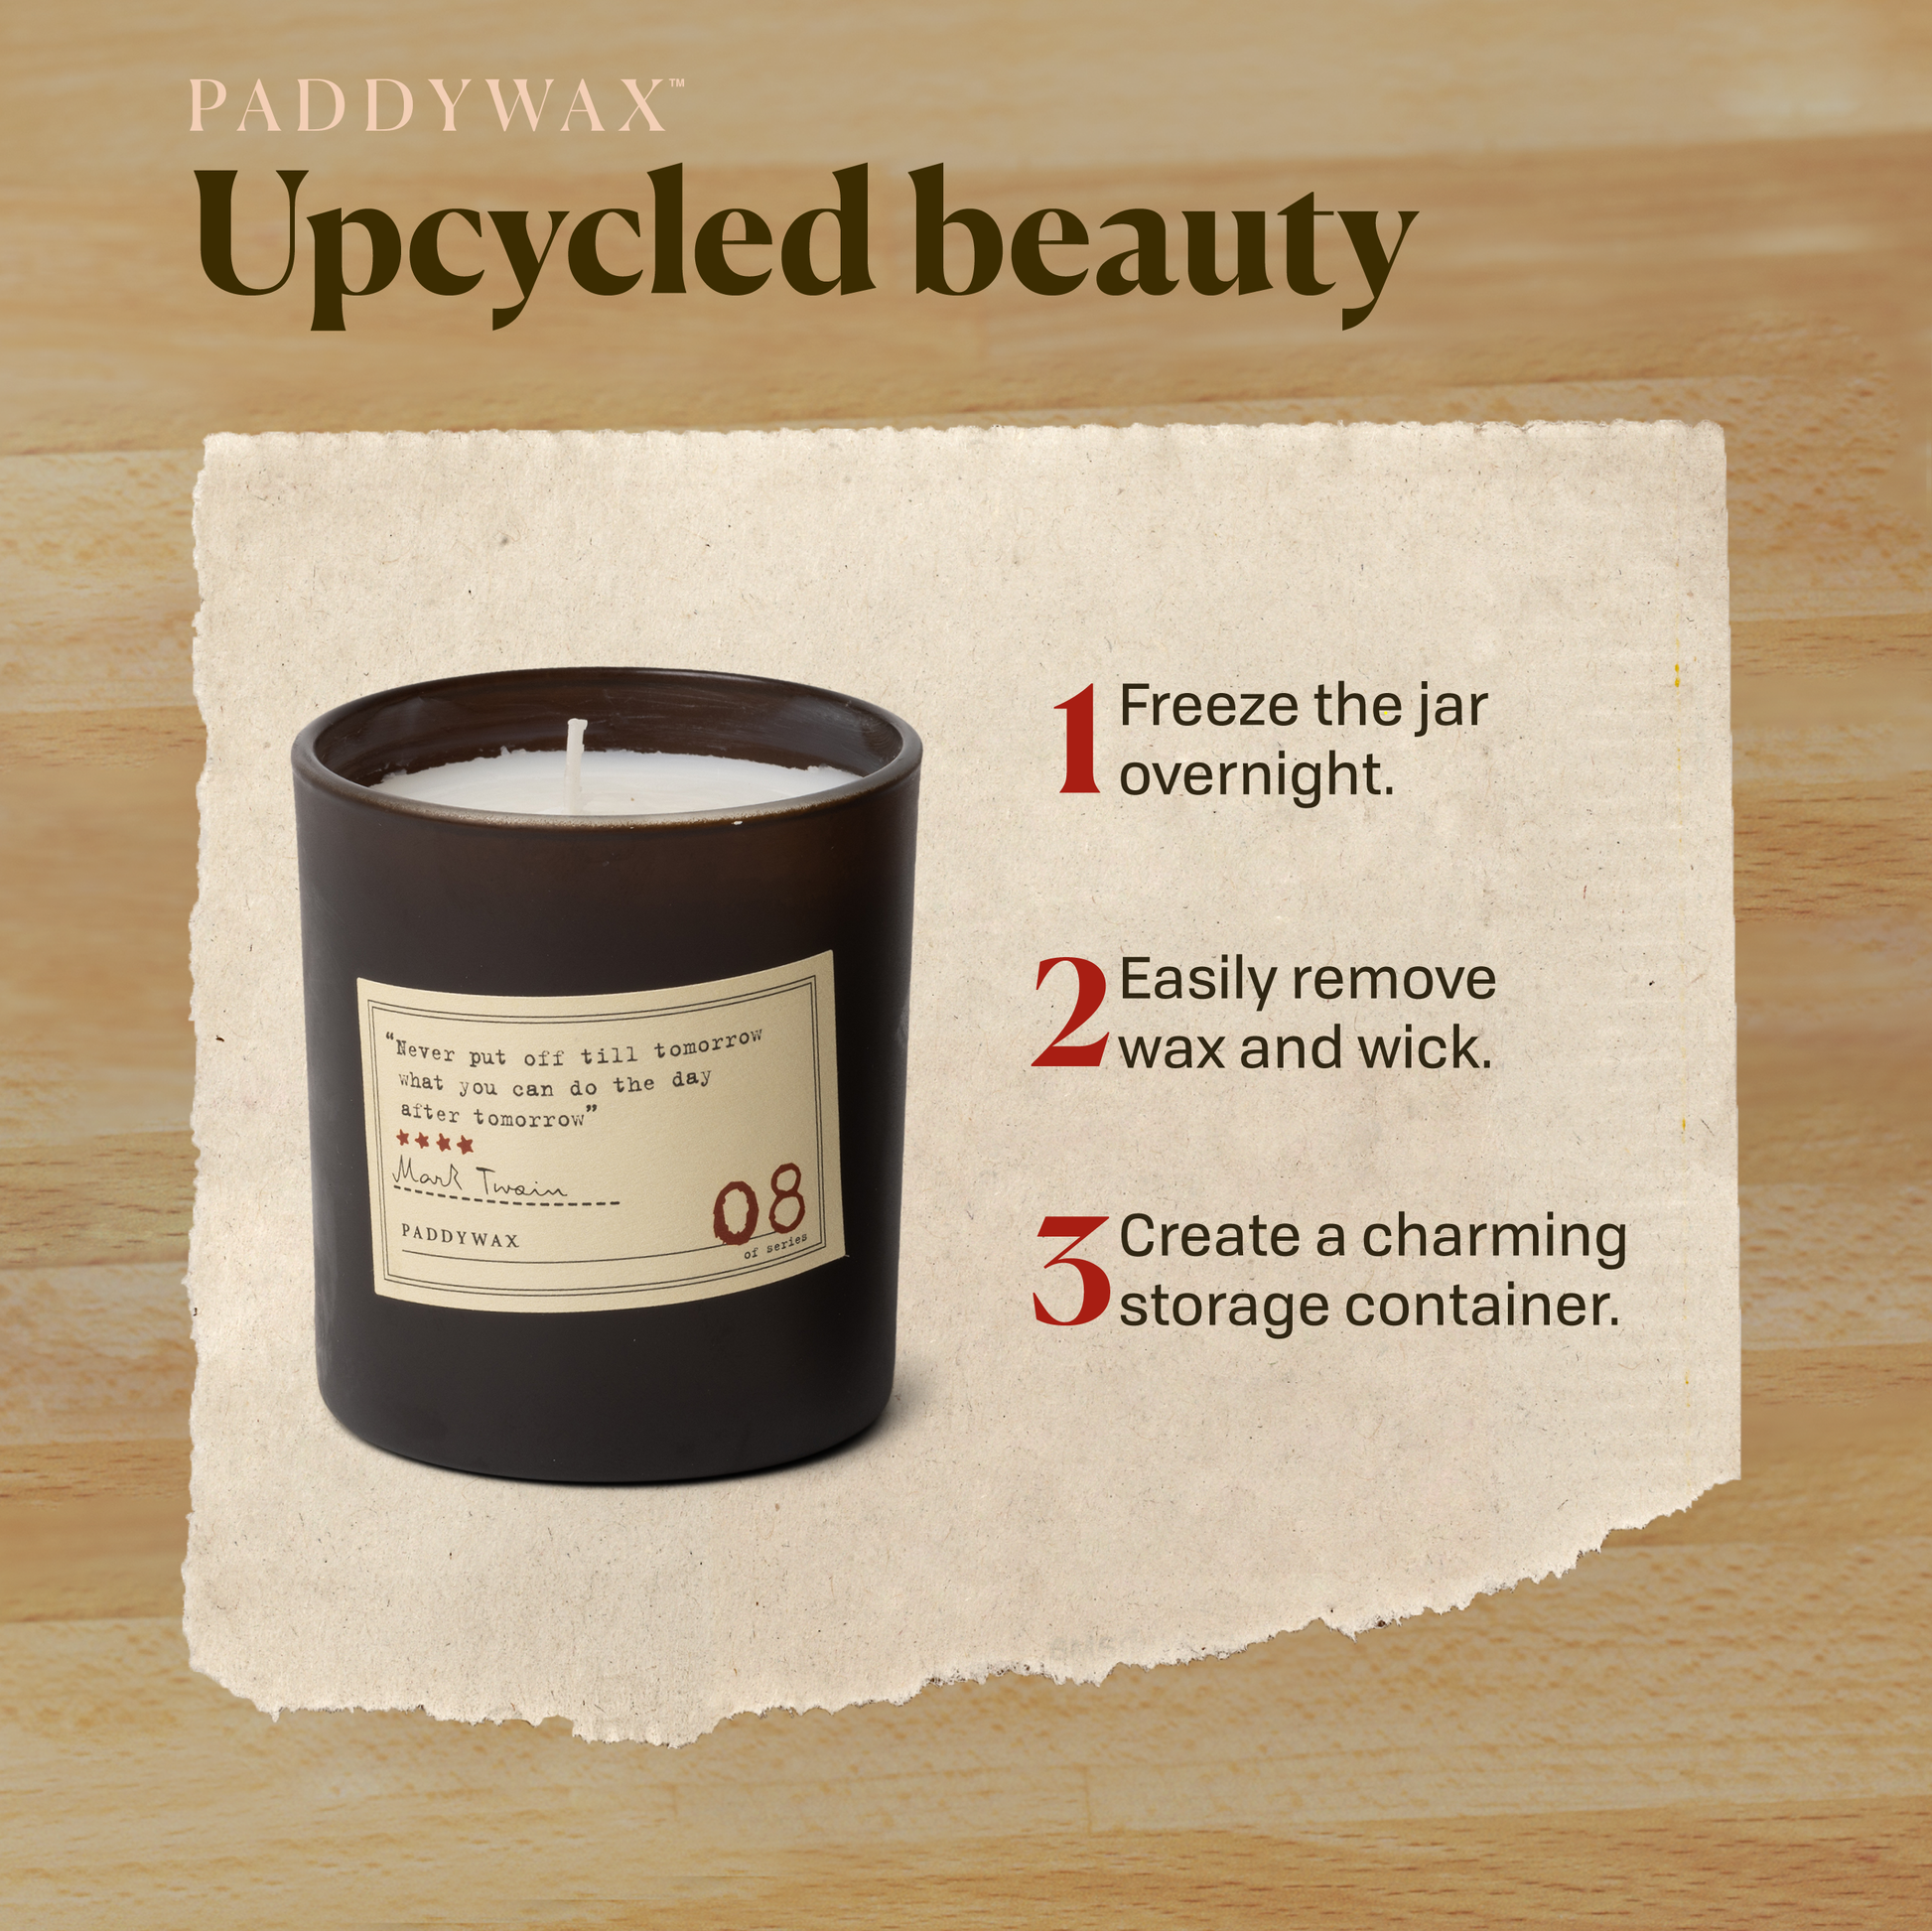 Photo of a candle on a wood background. Upcycled beauty. 1.) Freeze the jar overnight. 2.) Easily remove wax and wick. 3.) Create a charming storage container.